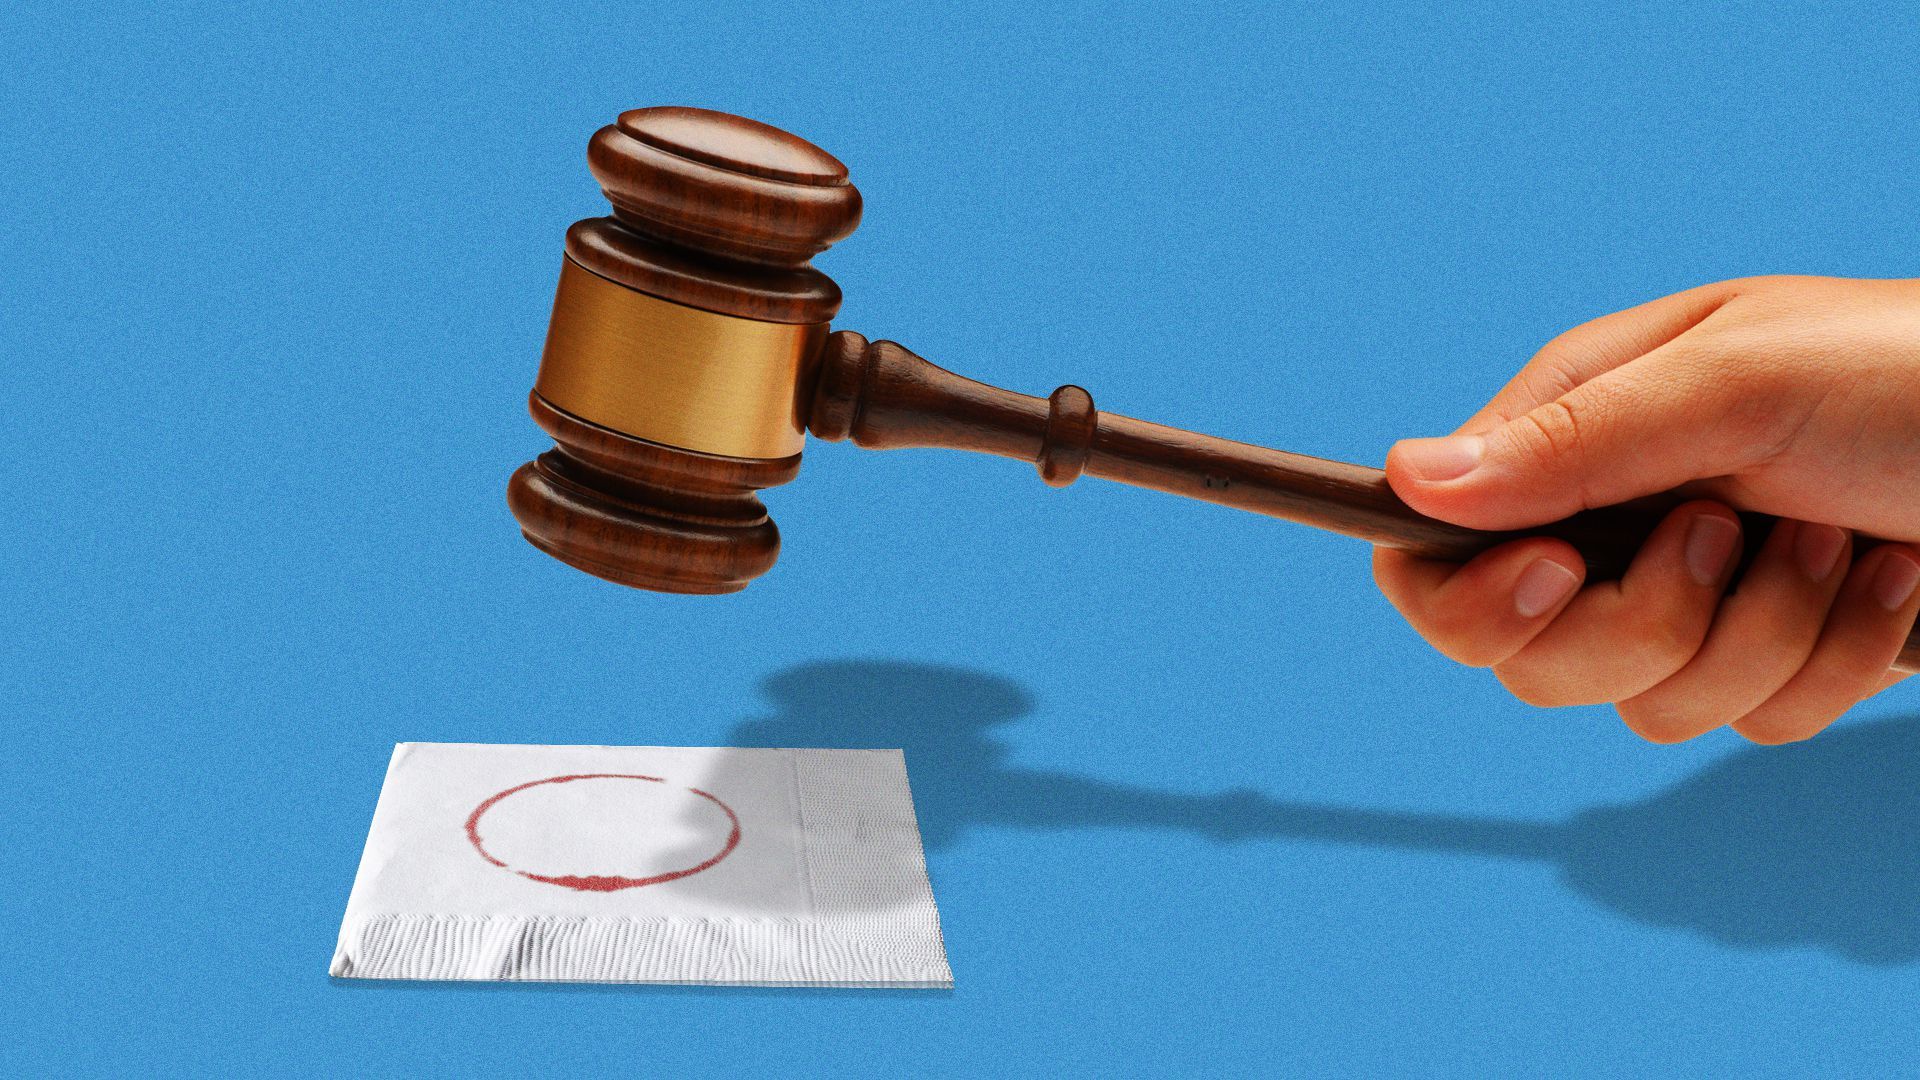 Illustration of a gavel coming down on a cocktail napkin.